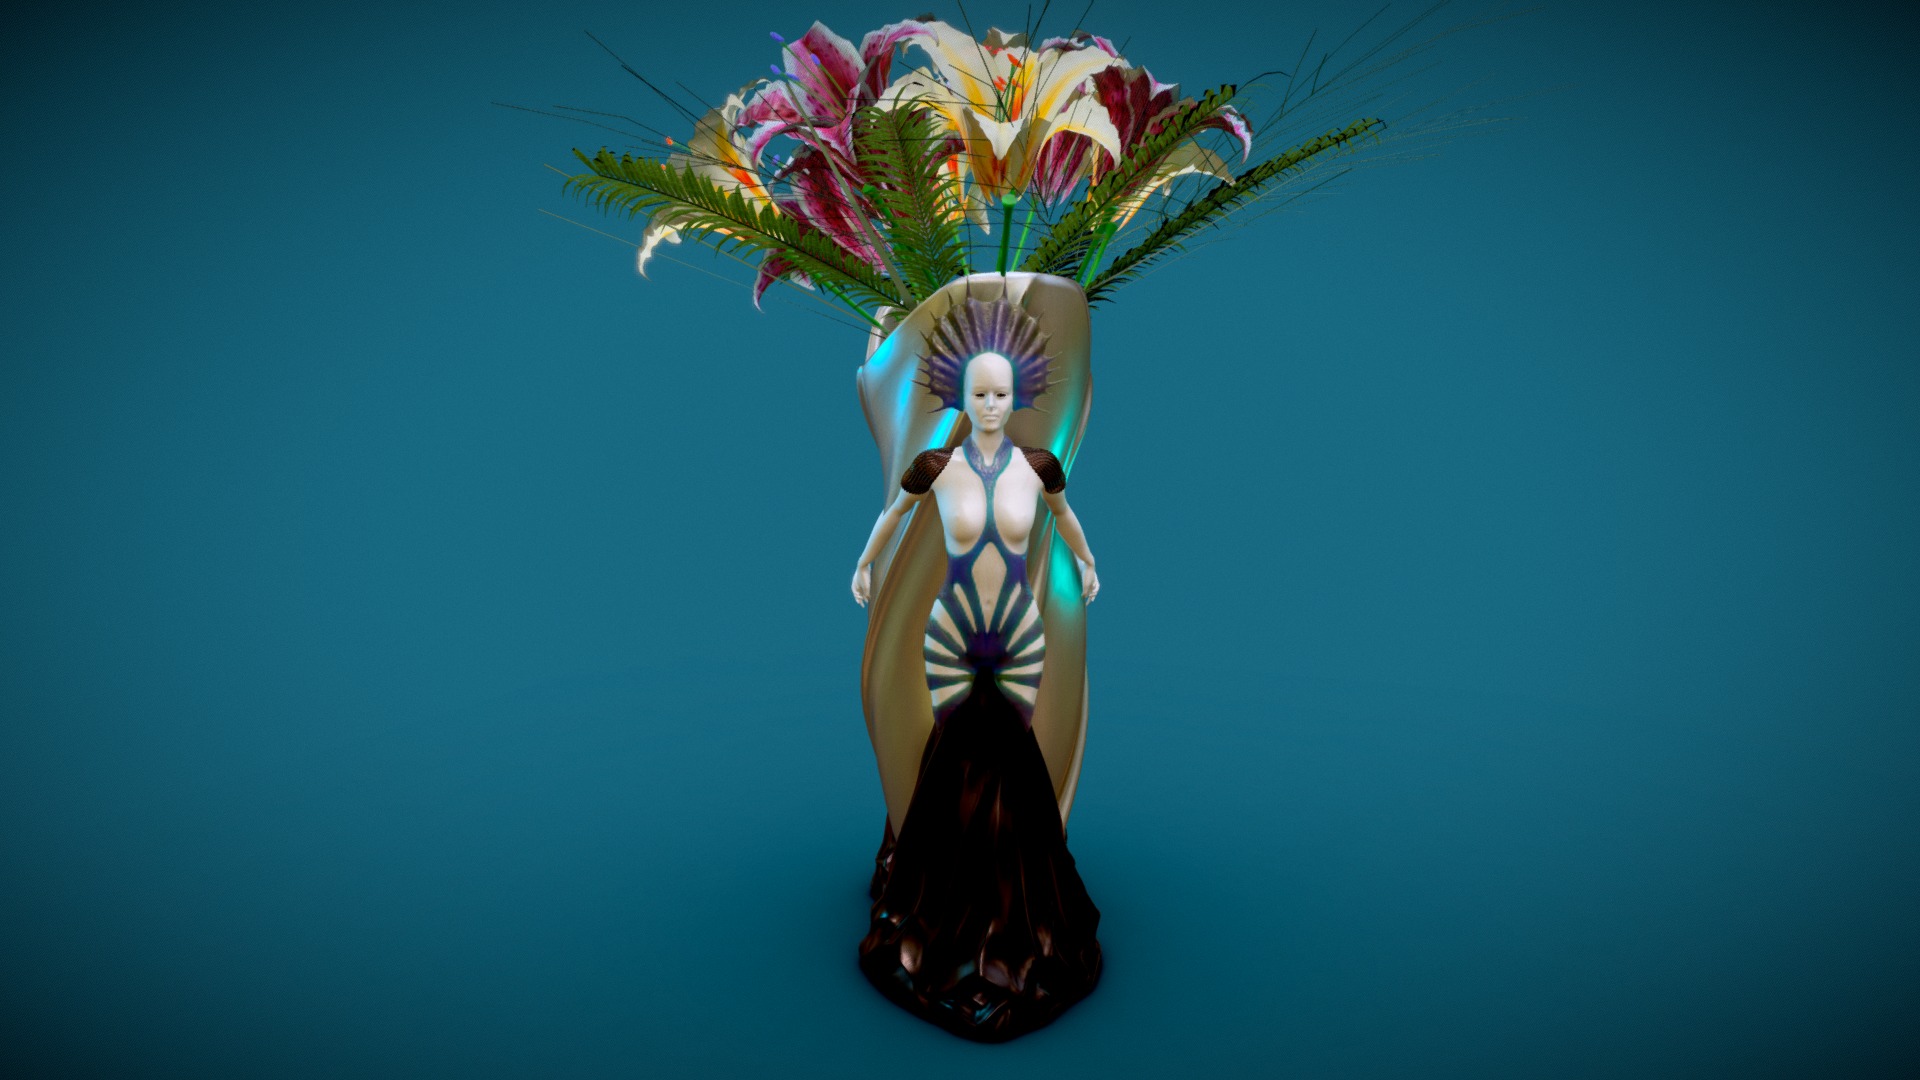 3D model Vase with Flowers - This is a 3D model of the Vase with Flowers. The 3D model is about a person in a garment.